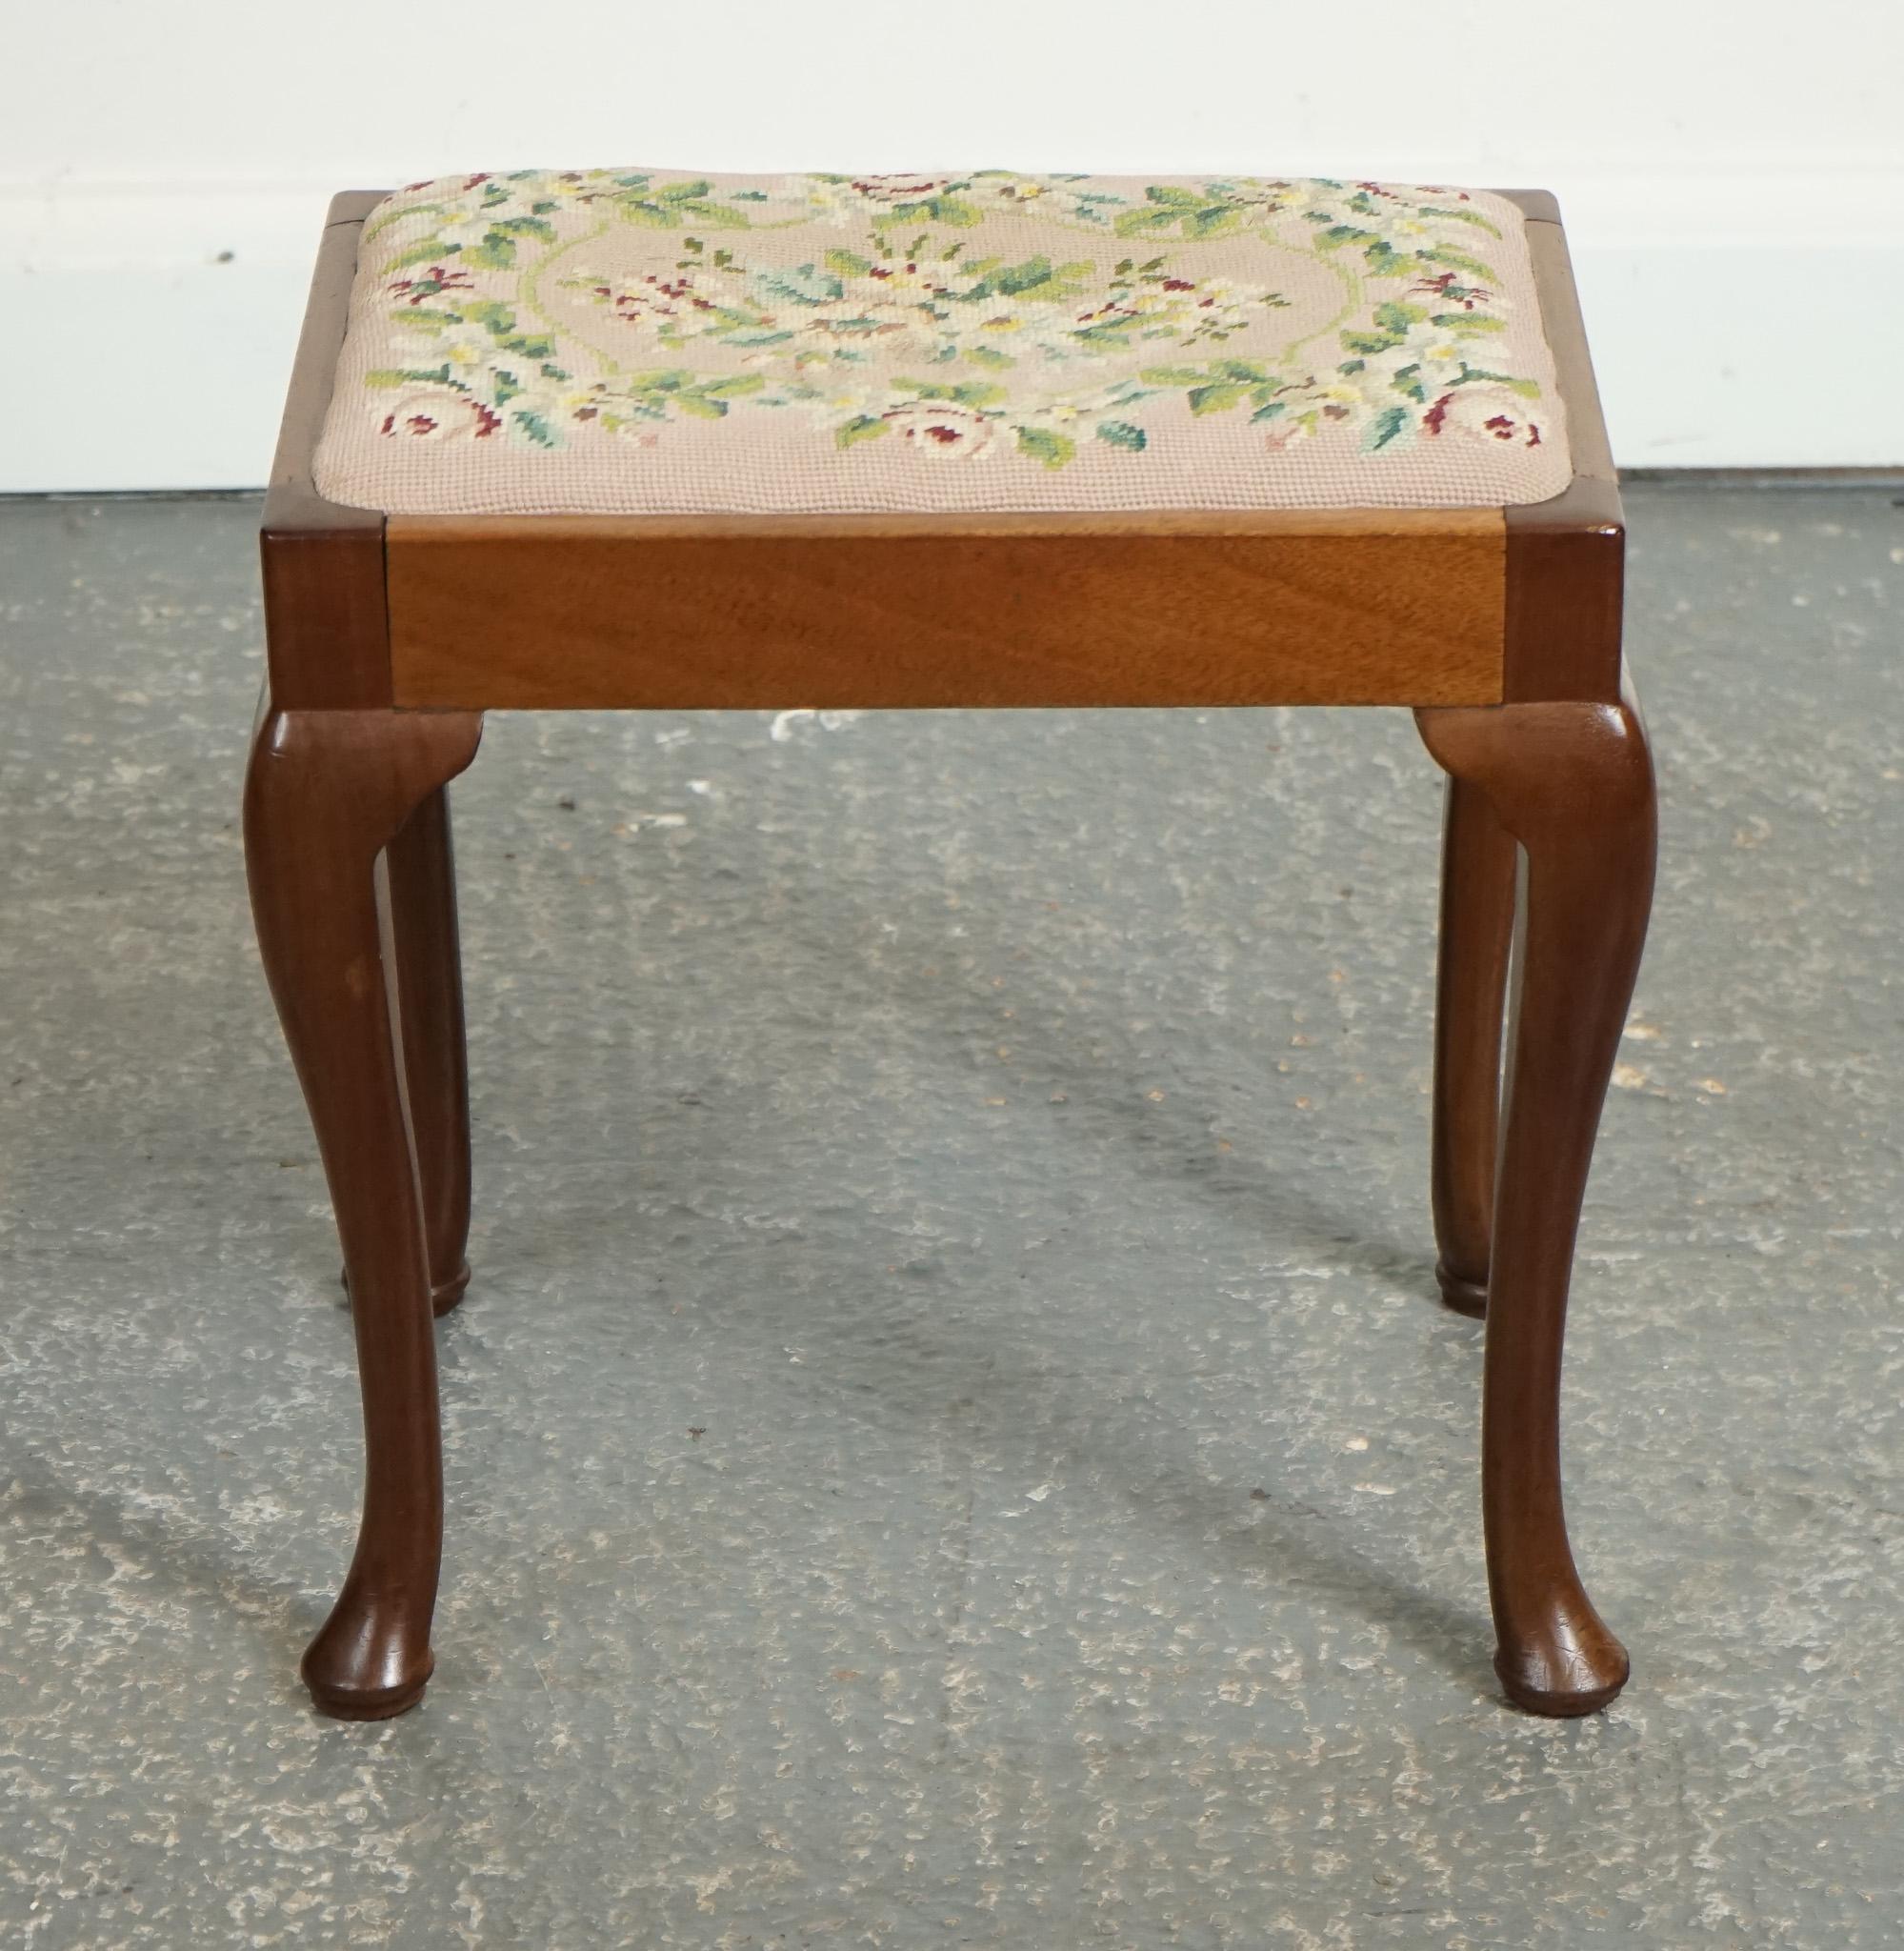 Hand-Crafted LOVELY PIANO DRESSING TABLE STOOL WITH FLOWER STITCHWORK WITH QUEEN ANNE LEGS j1 For Sale